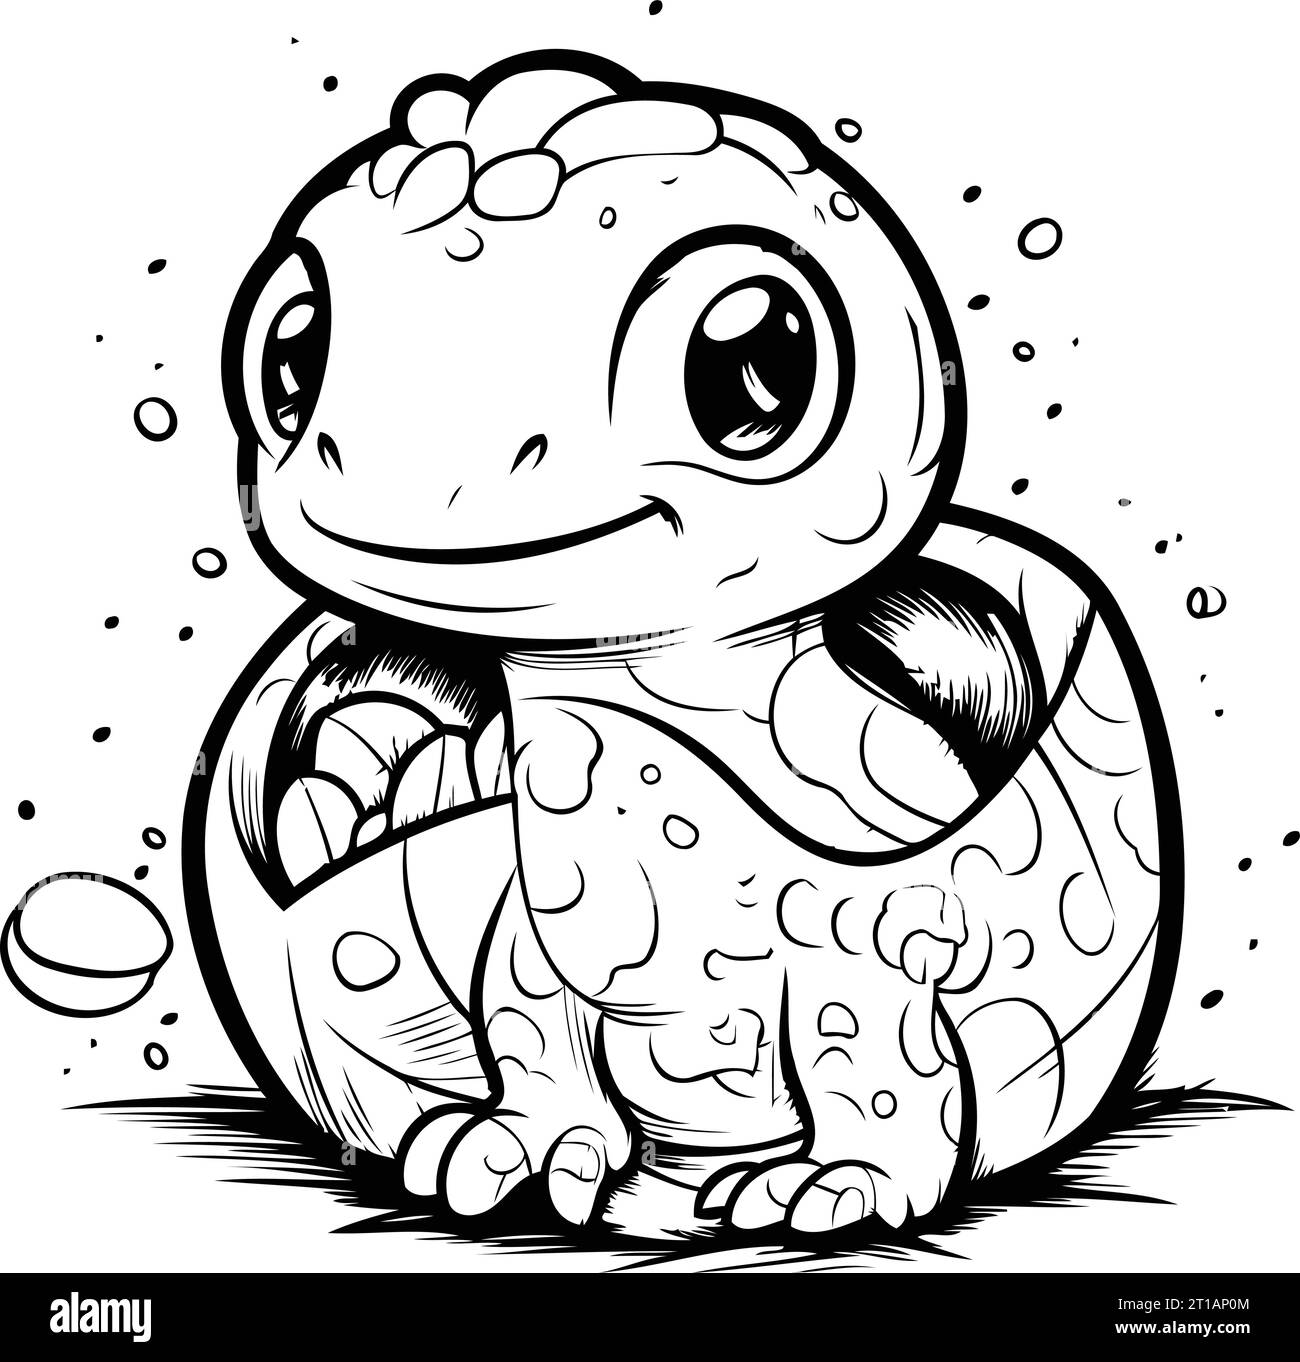 Frog   Black and White Cartoon Illustration for Coloring Book Stock Vector